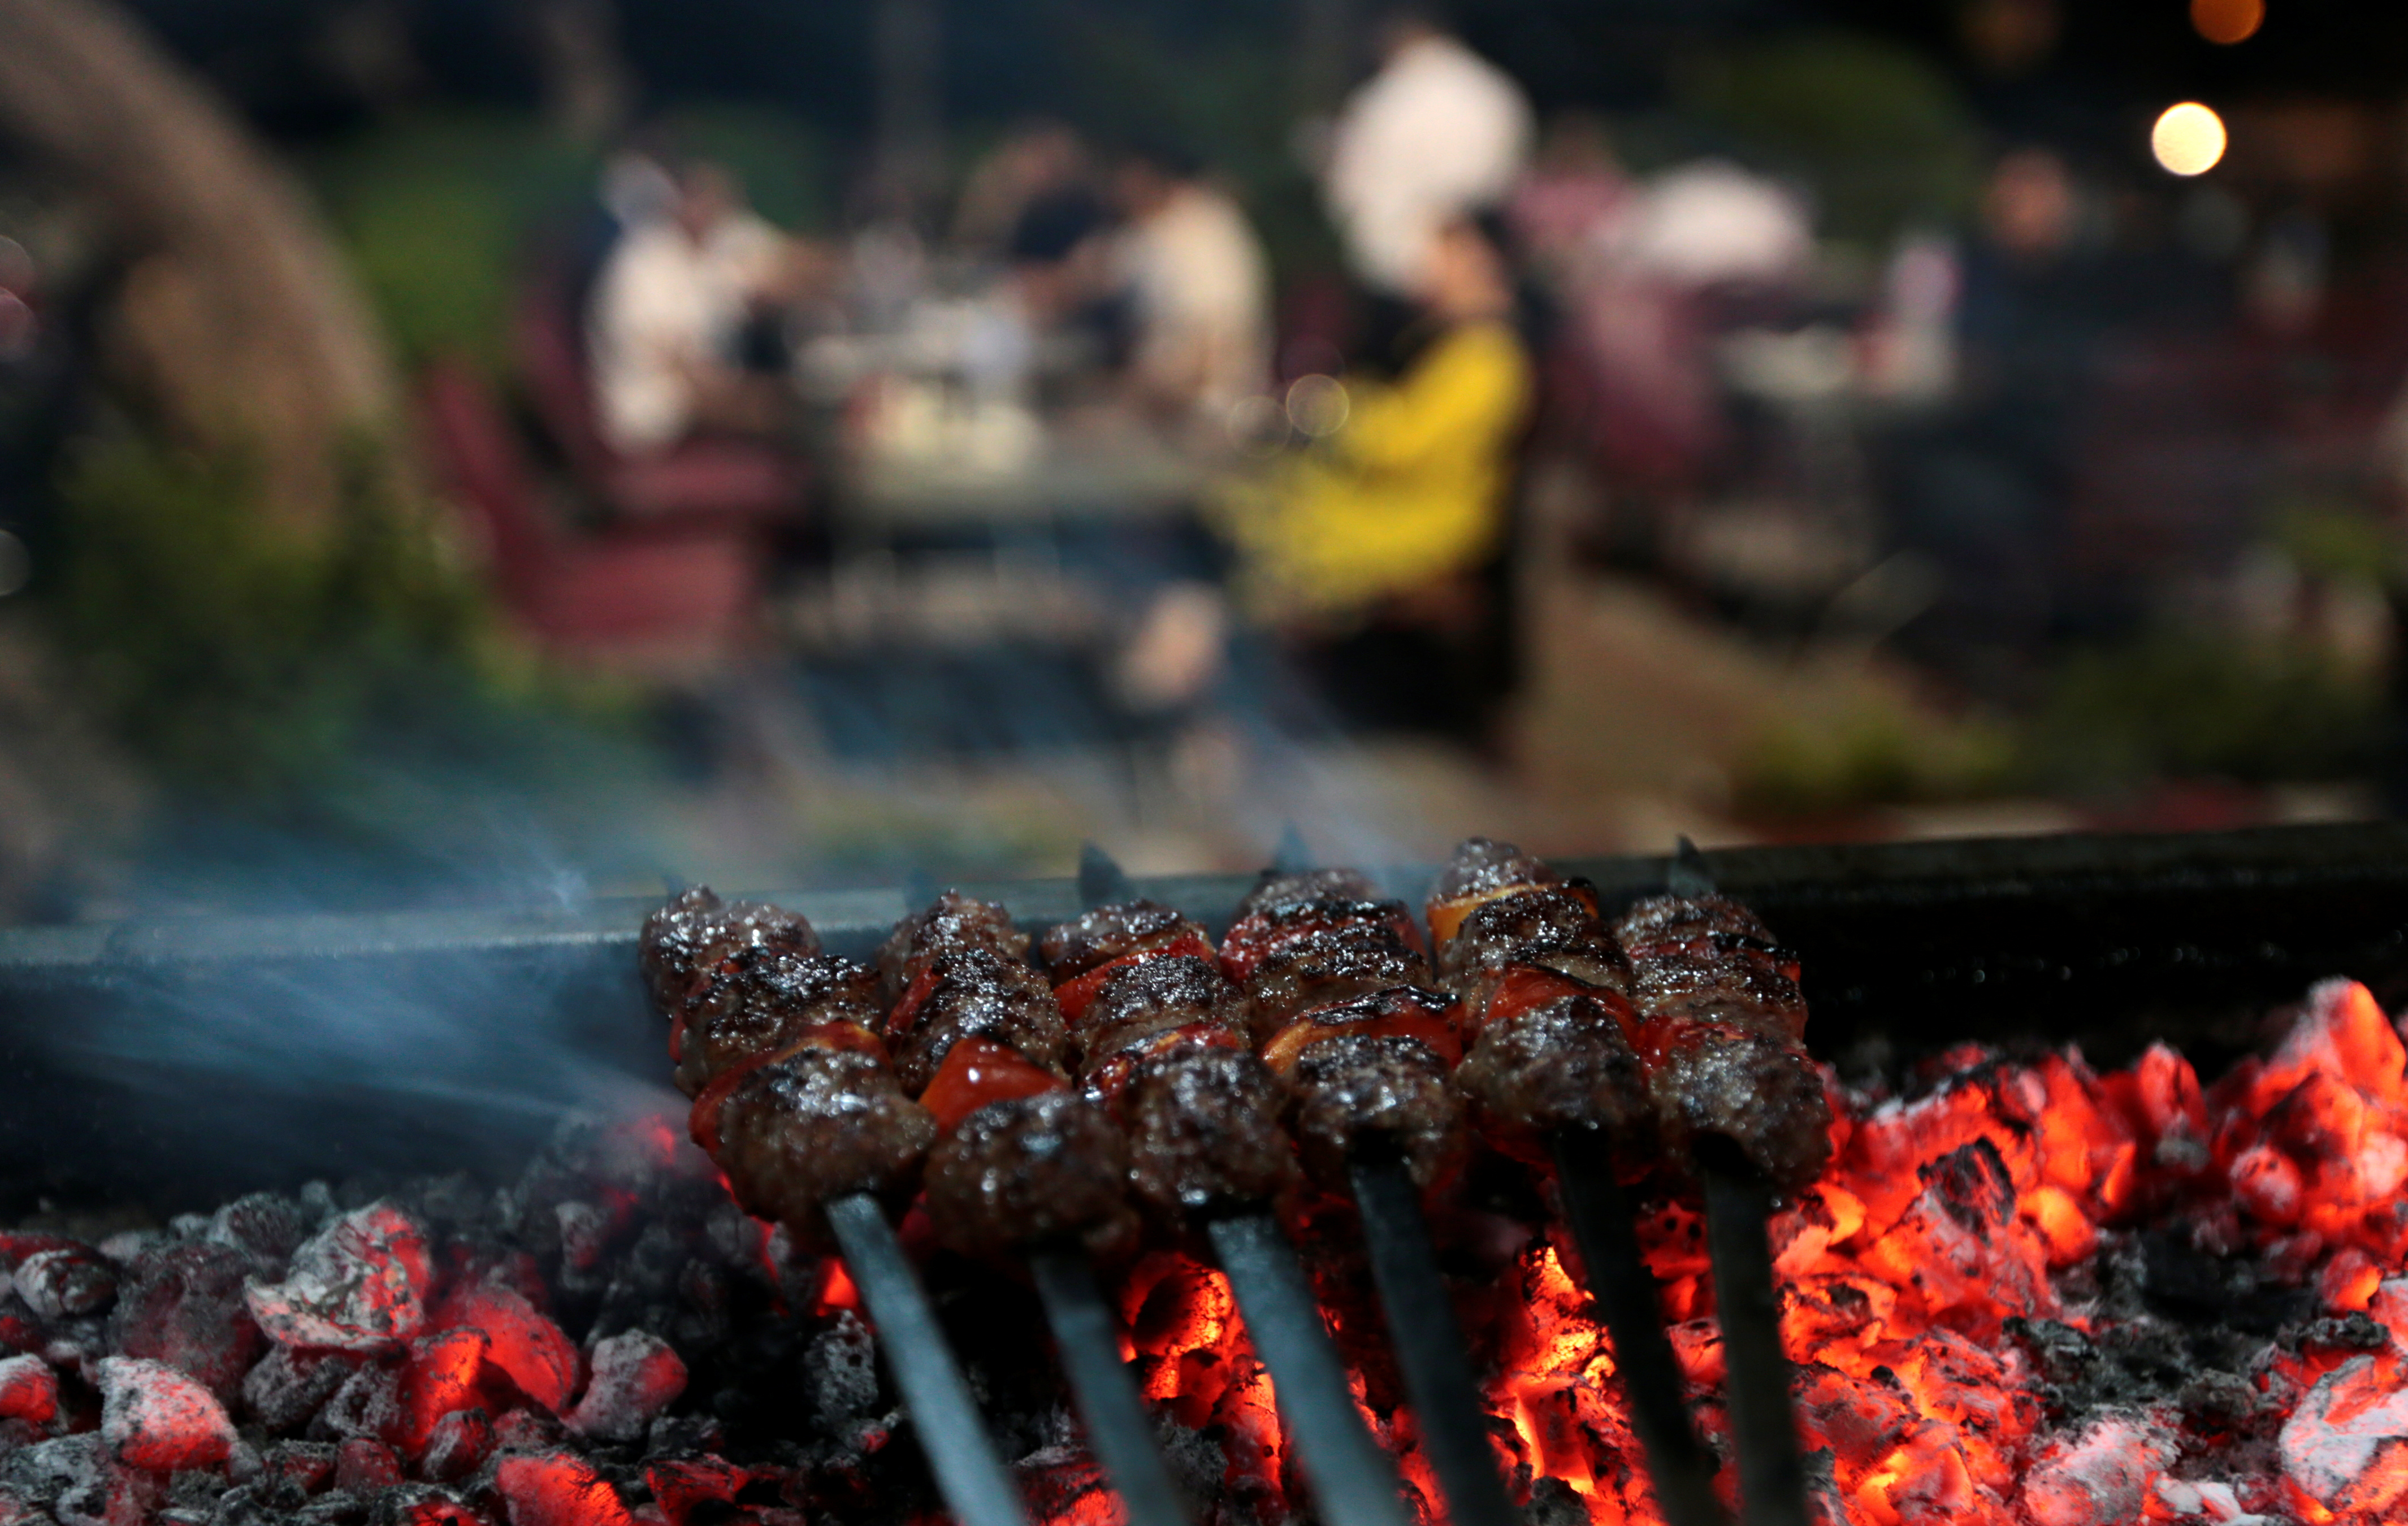 Minced meat kebab is seen being cooked on a barbecue as restaurant customers have dinner in Islamabad